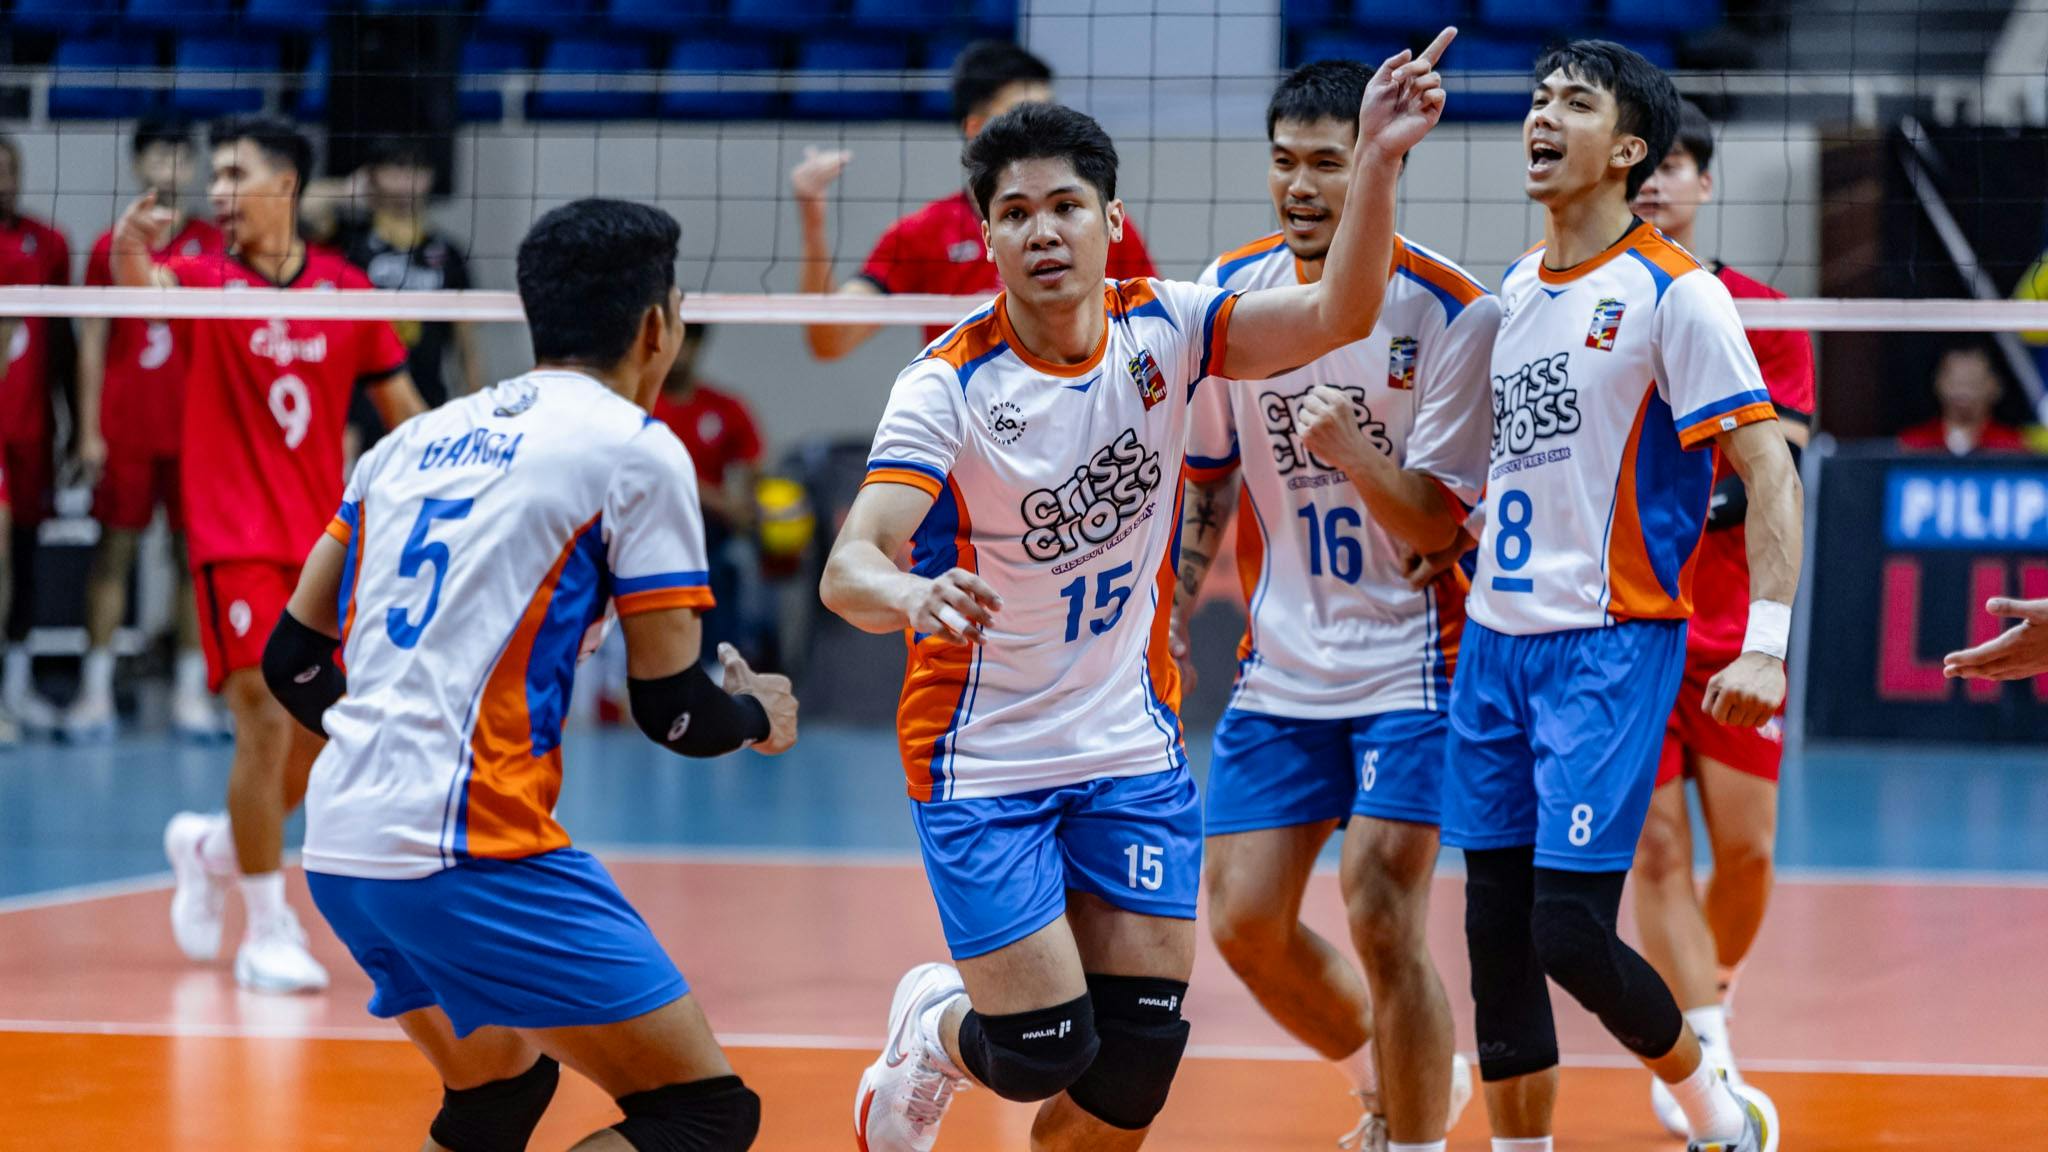 Spikers’ Turf: Marck Espejo, Criss Cross take Finals slot after overcoming 38 points from Bryan Bagunas in comeback win vs. Cignal